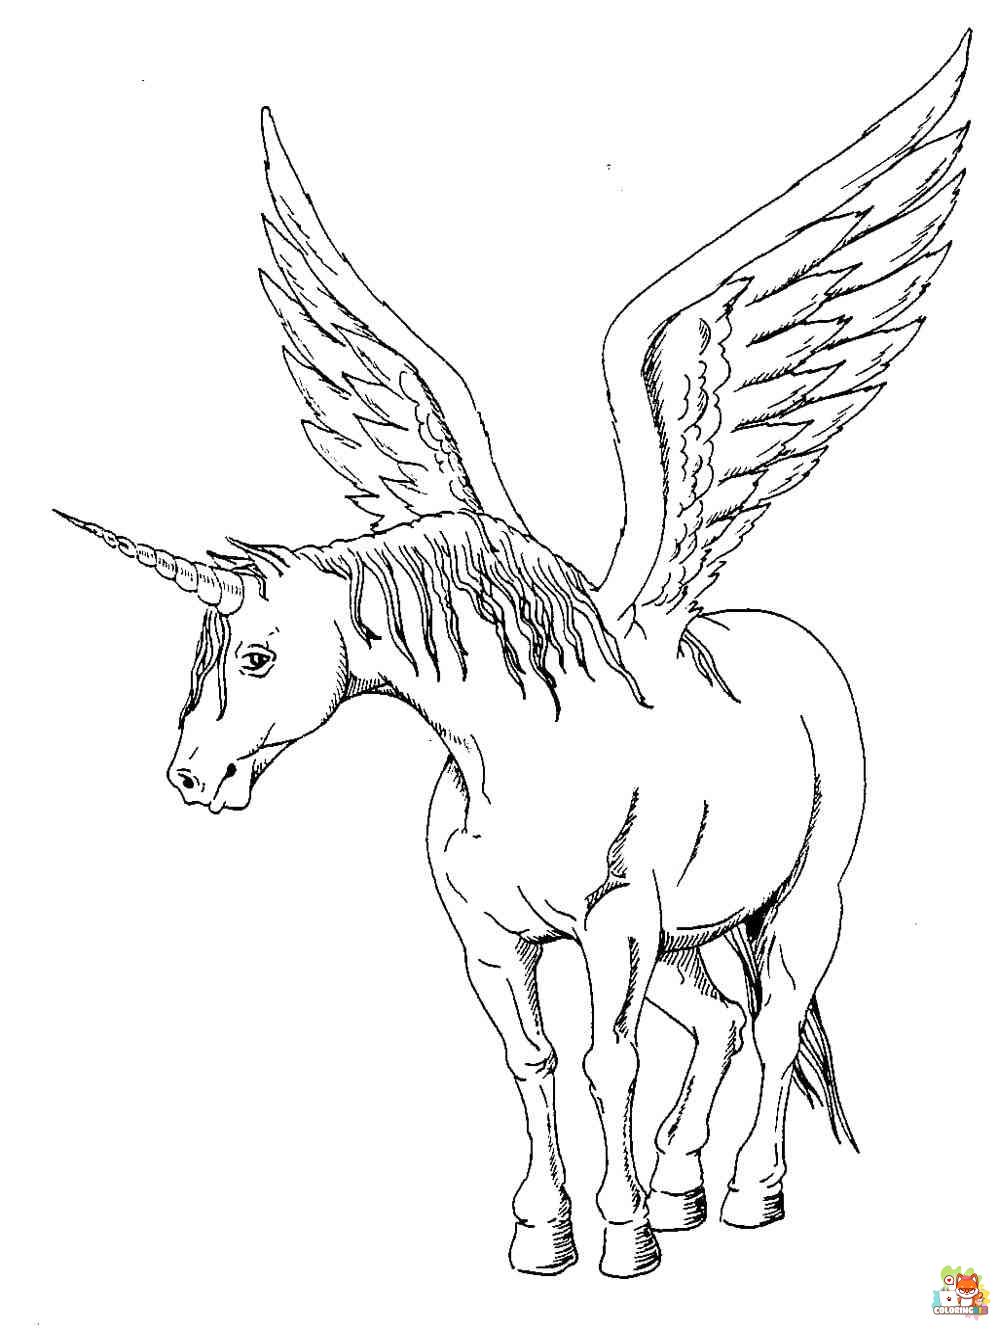 Winged Unicorn Coloring Pages 12